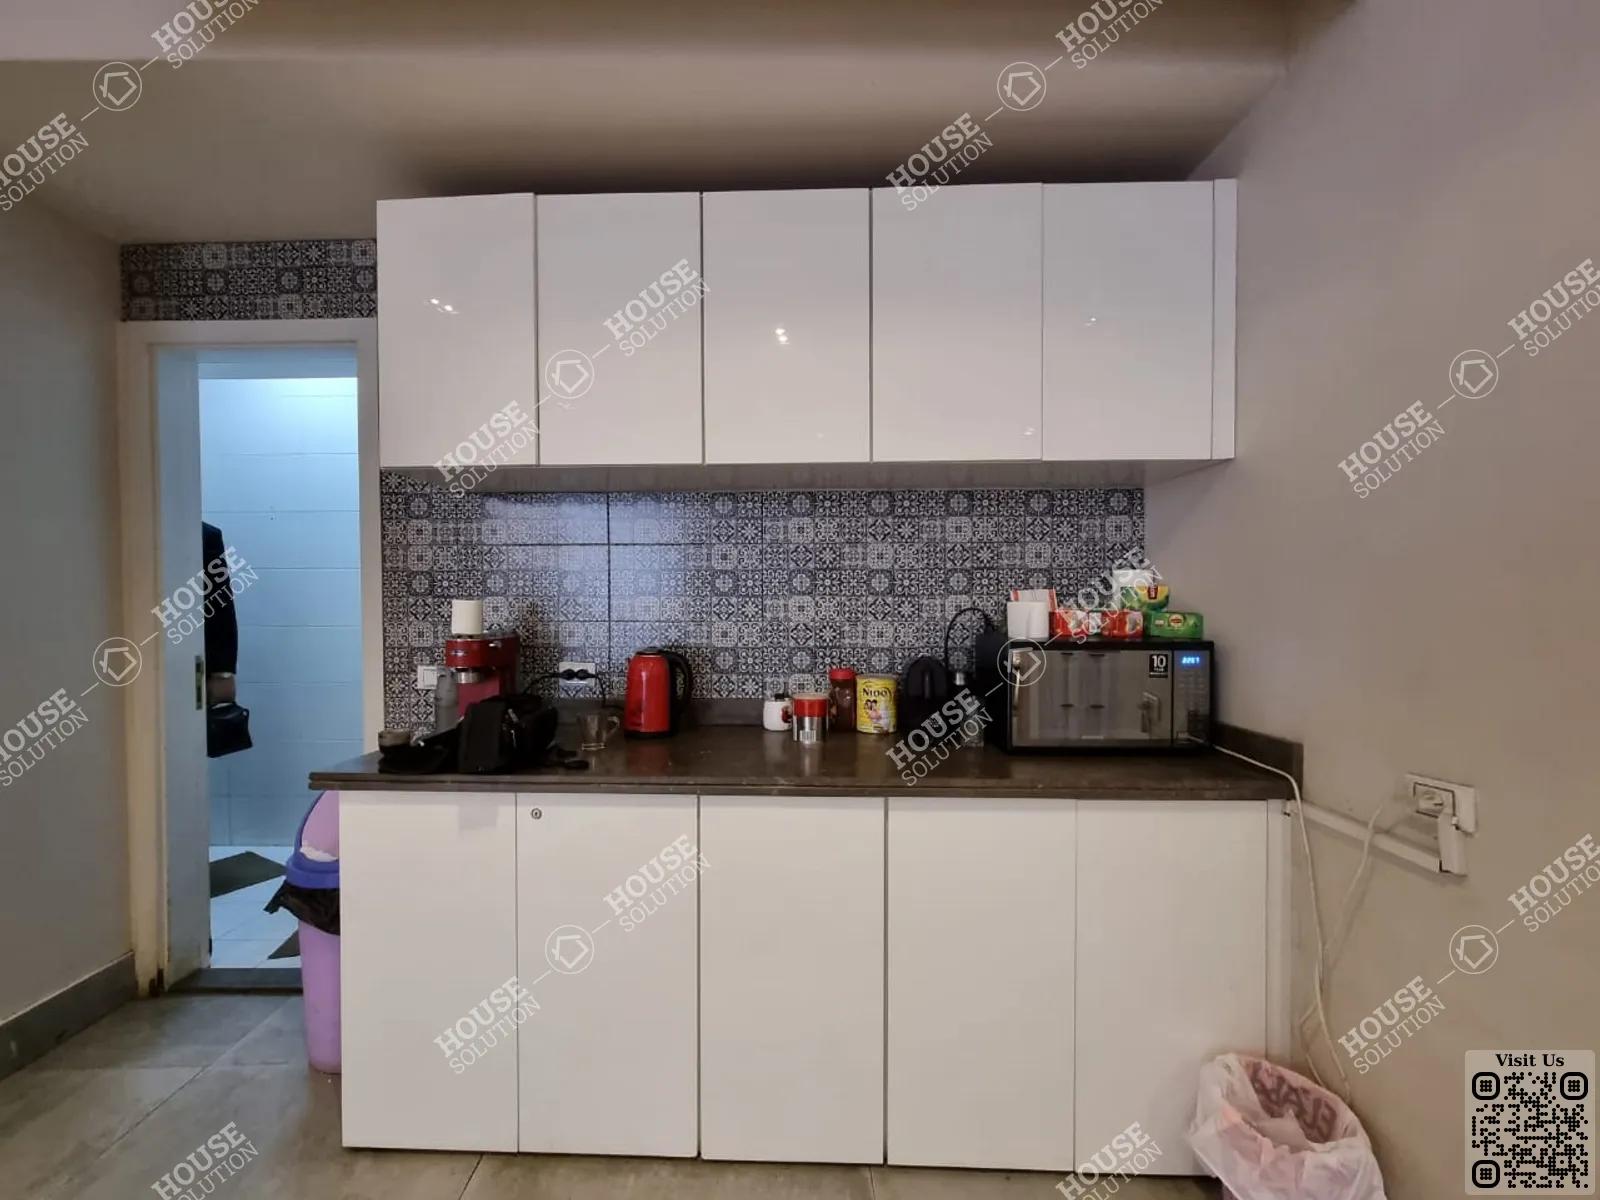 KITCHEN  @ Office spaces For Rent In Maadi Maadi Degla Area: 650 m² consists of 10 Bedrooms 5 Bathrooms Semi furnished 5 stars #5312-2